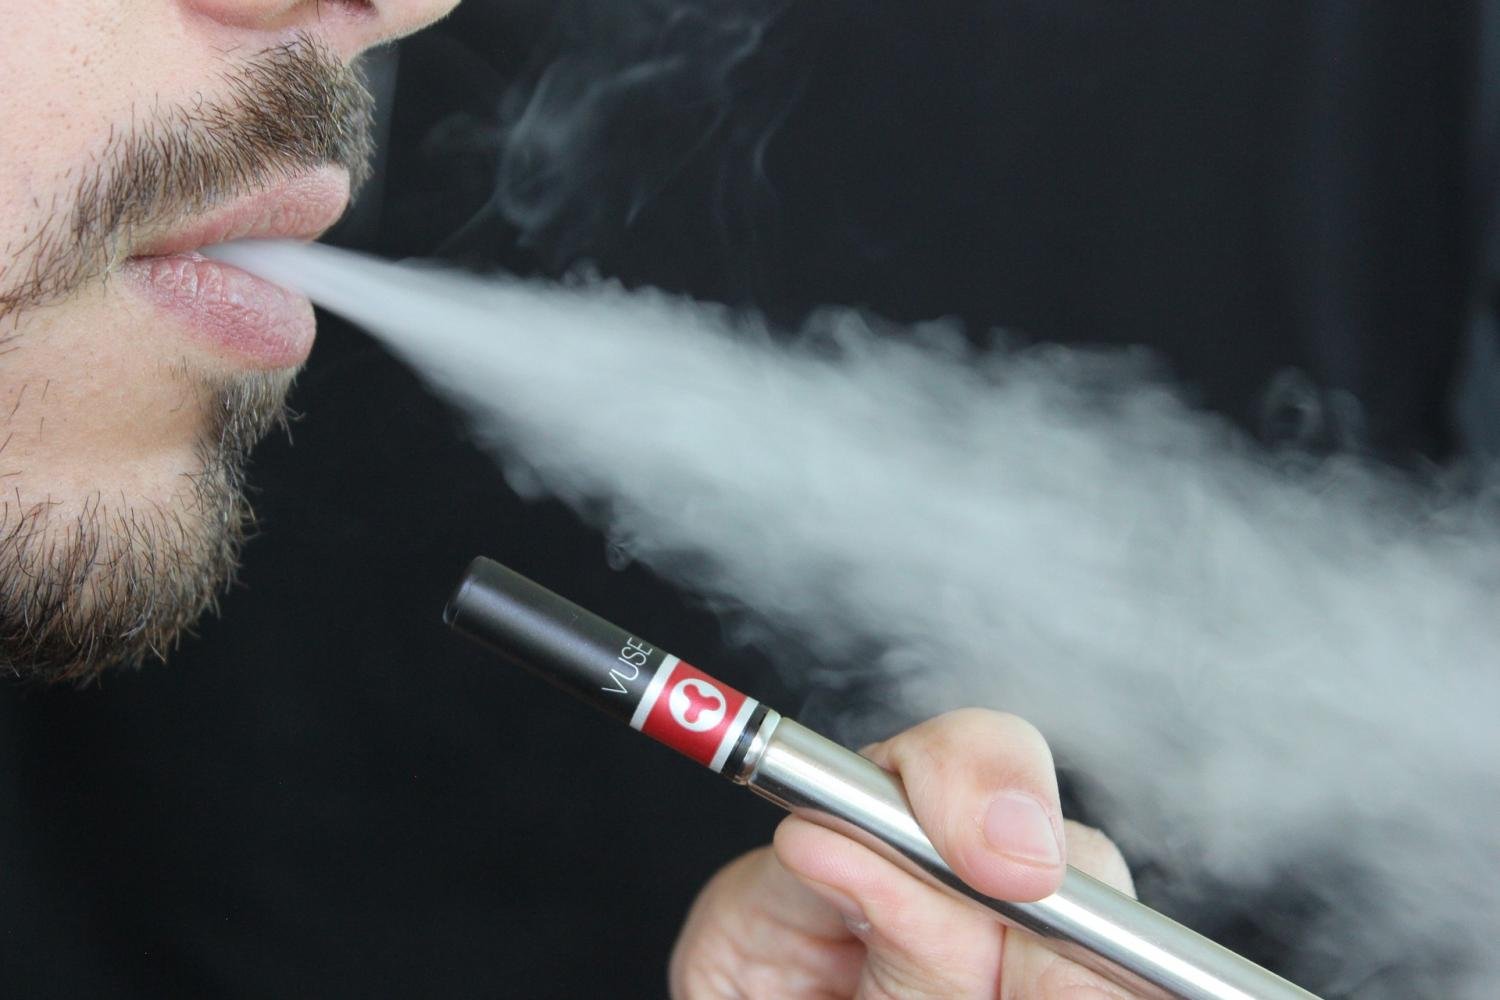 Study finds e cigarette users now more likely to quit traditional cigarettes